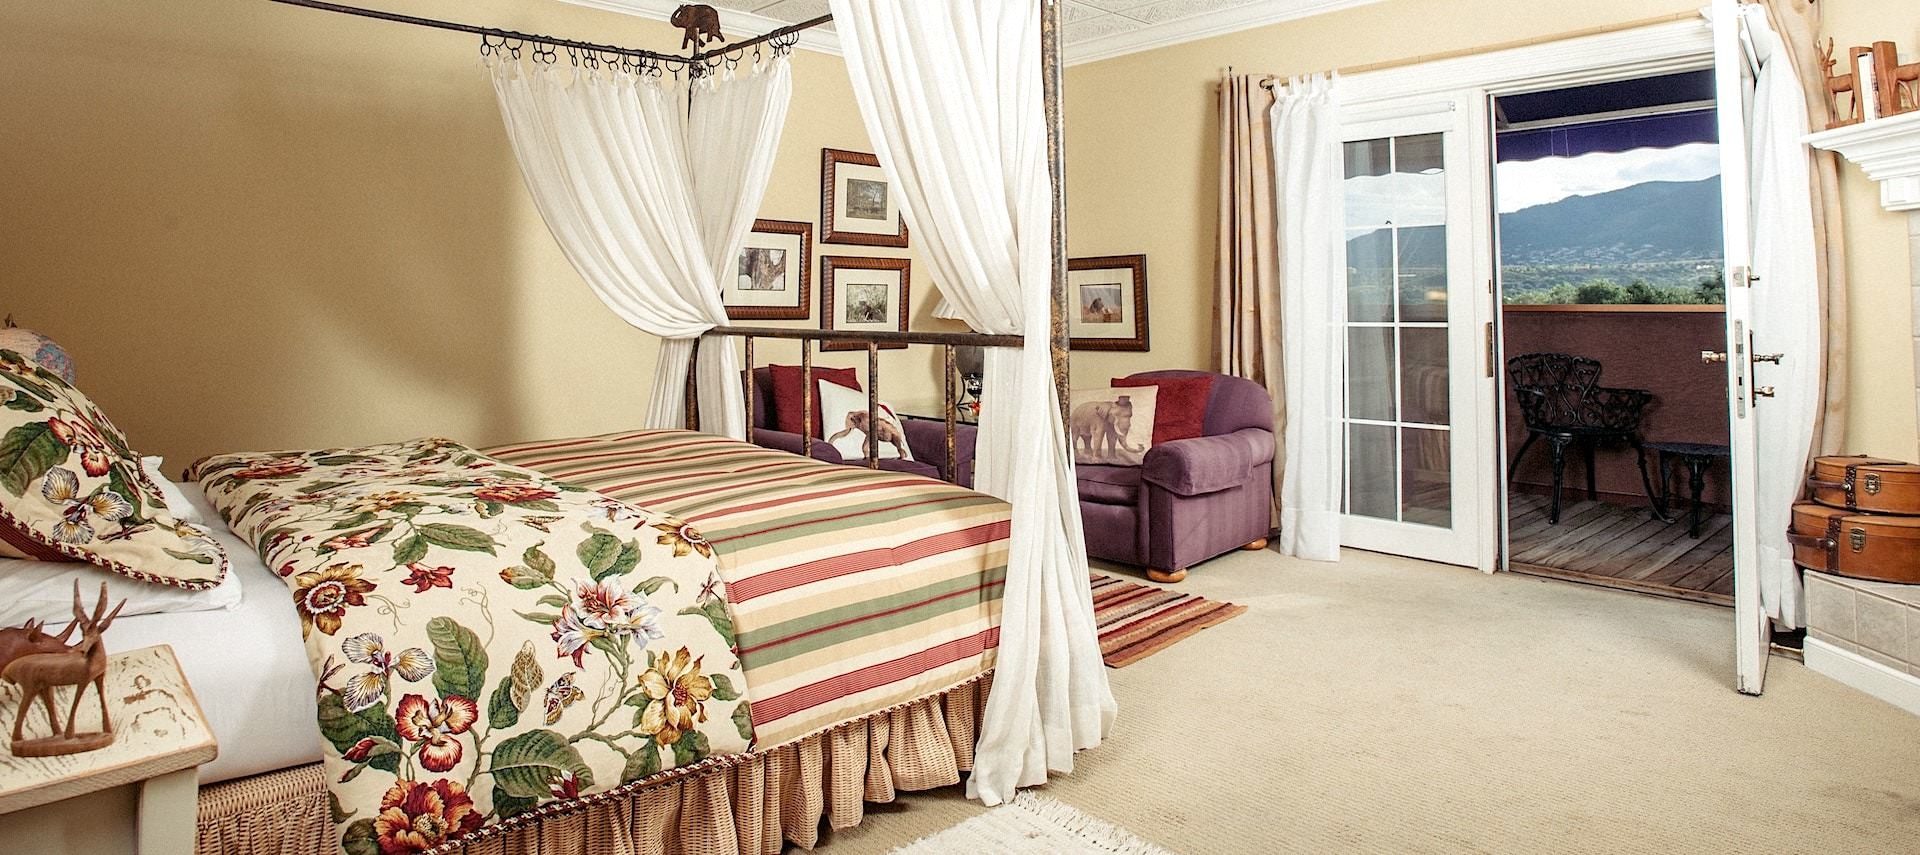 Bedroom suite with cream walls, light colored carpeting, four poster canopy bed with white curtains, purple upholstered armchairs, and opened door to balcony